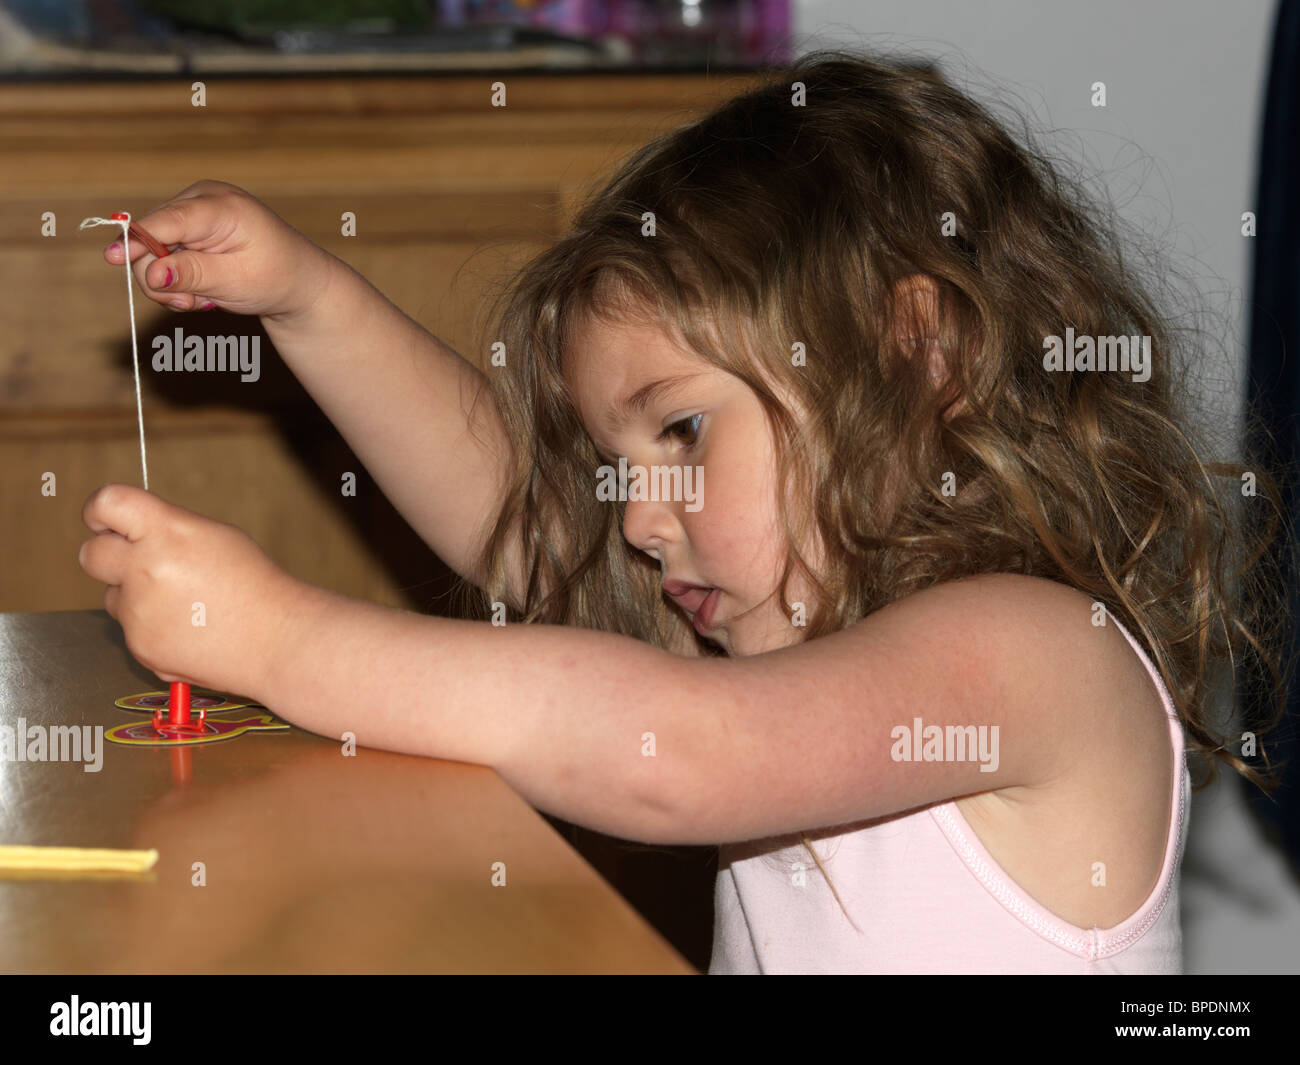 Toy fishing rod hi-res stock photography and images - Alamy